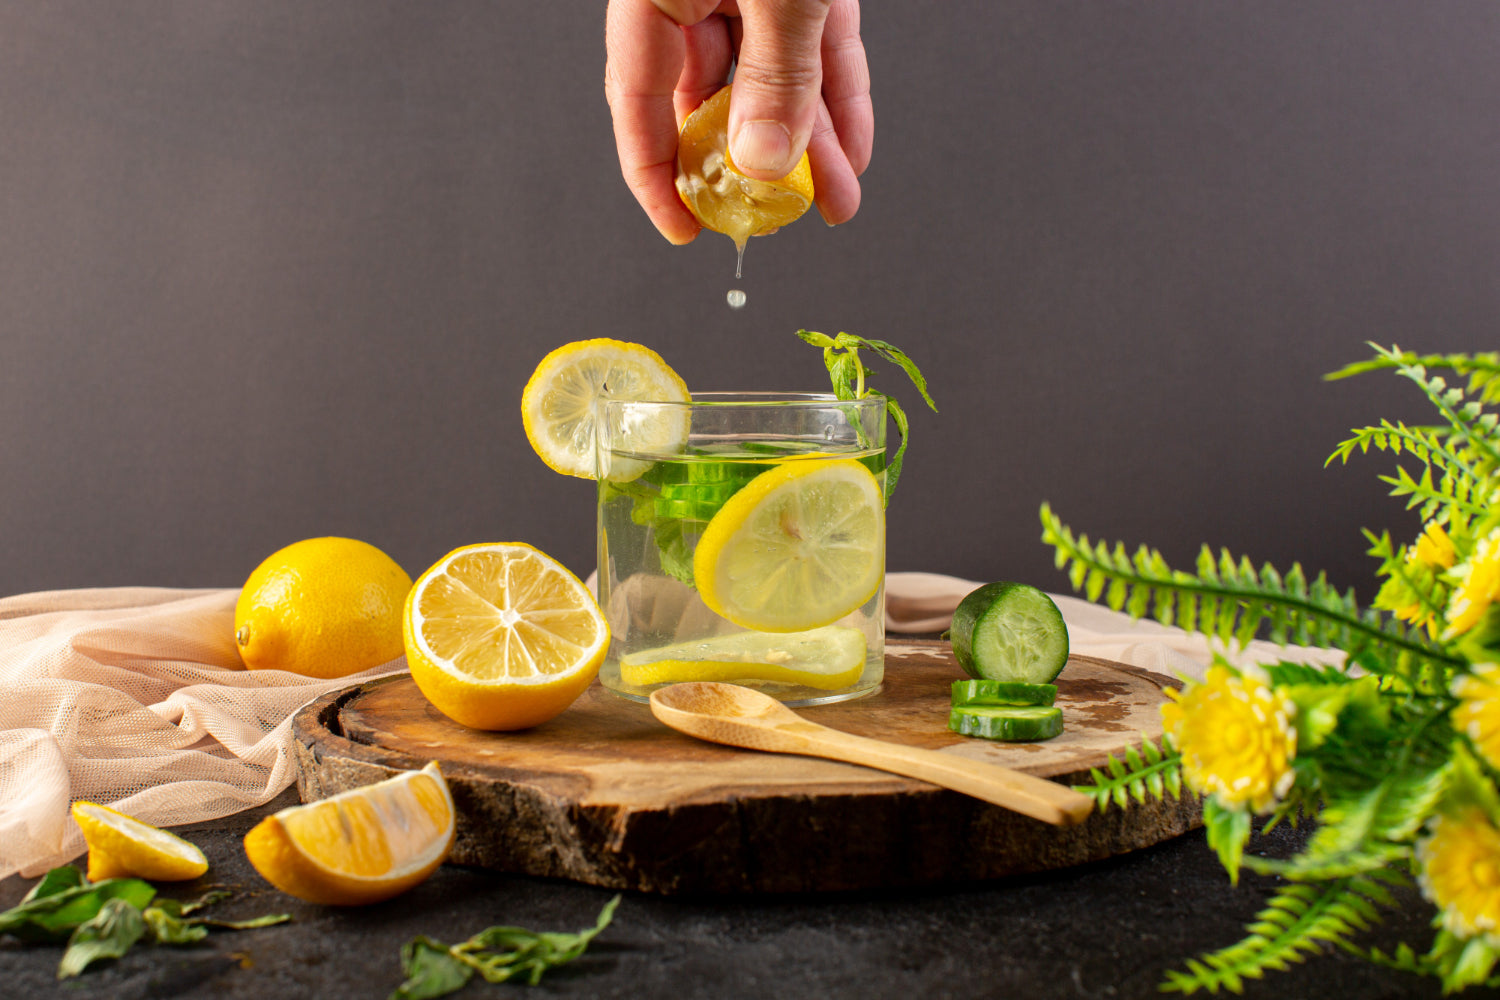 How to Use Lemon Water to Lose Weight?